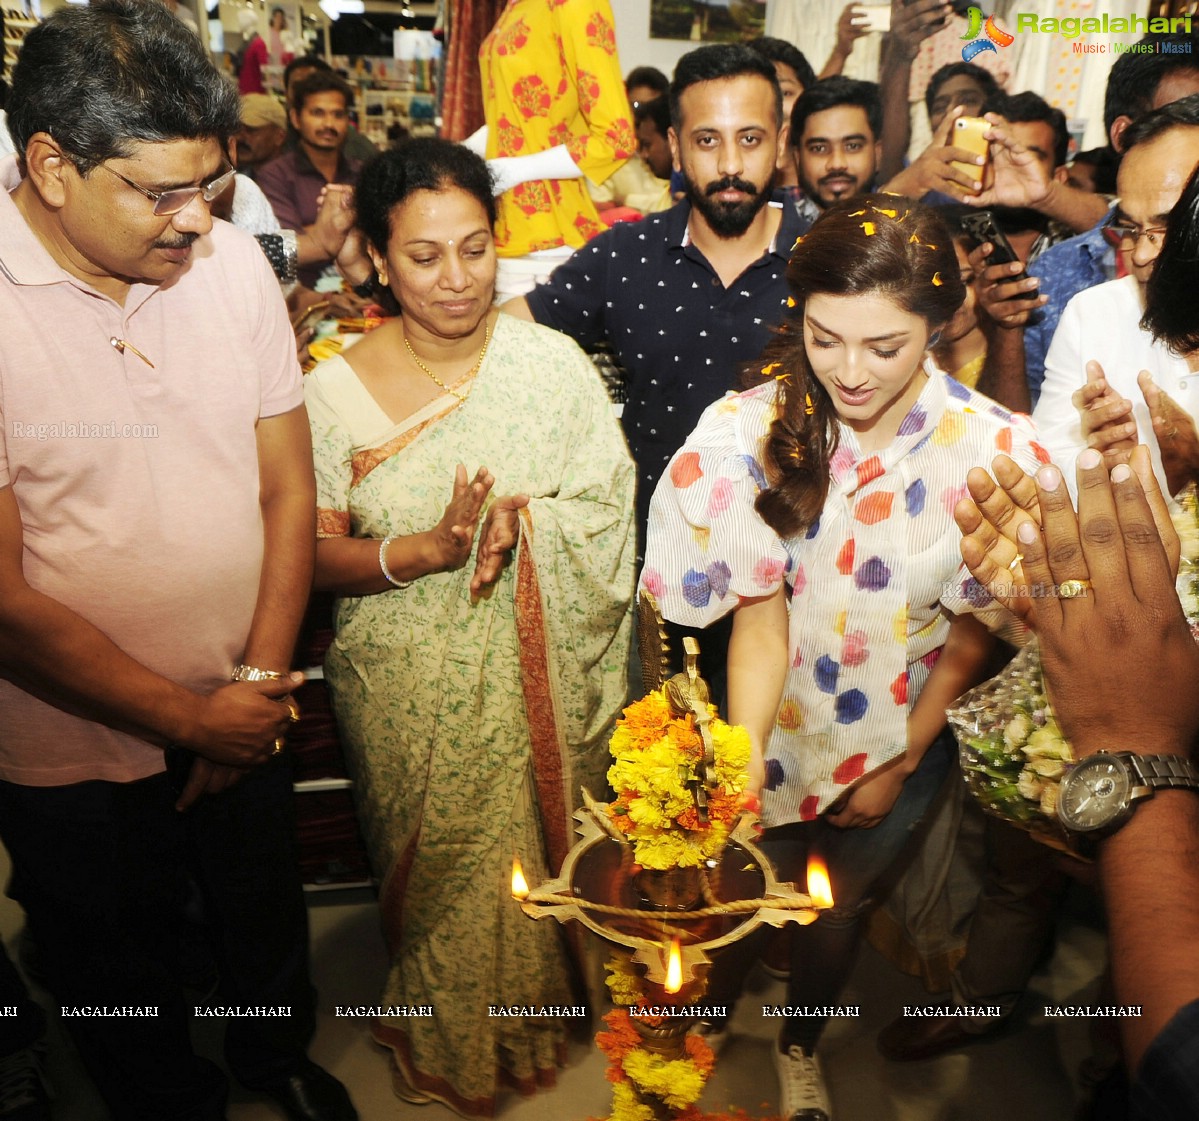 fbb's Second Store in Vijayawada Launched by Mehrene Pirzada